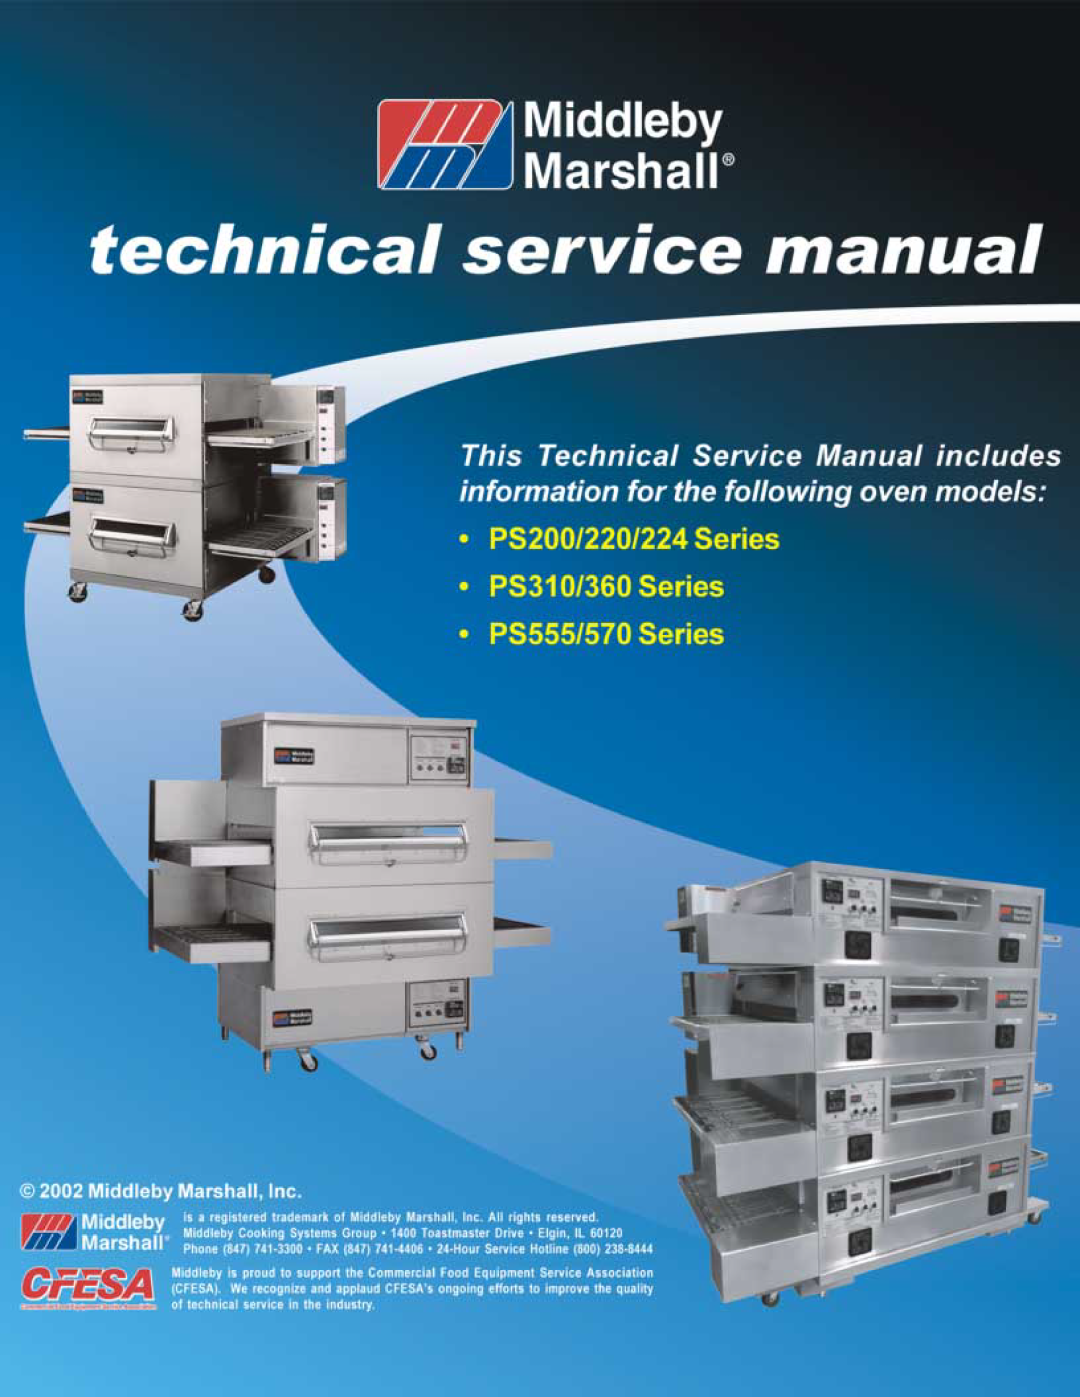 Middleby Marshall PS555 manual SPL030106-PF-BD Dated: March 1, Replaces PMD-15-05 Rev. B VI 12/00, Parts Manual 